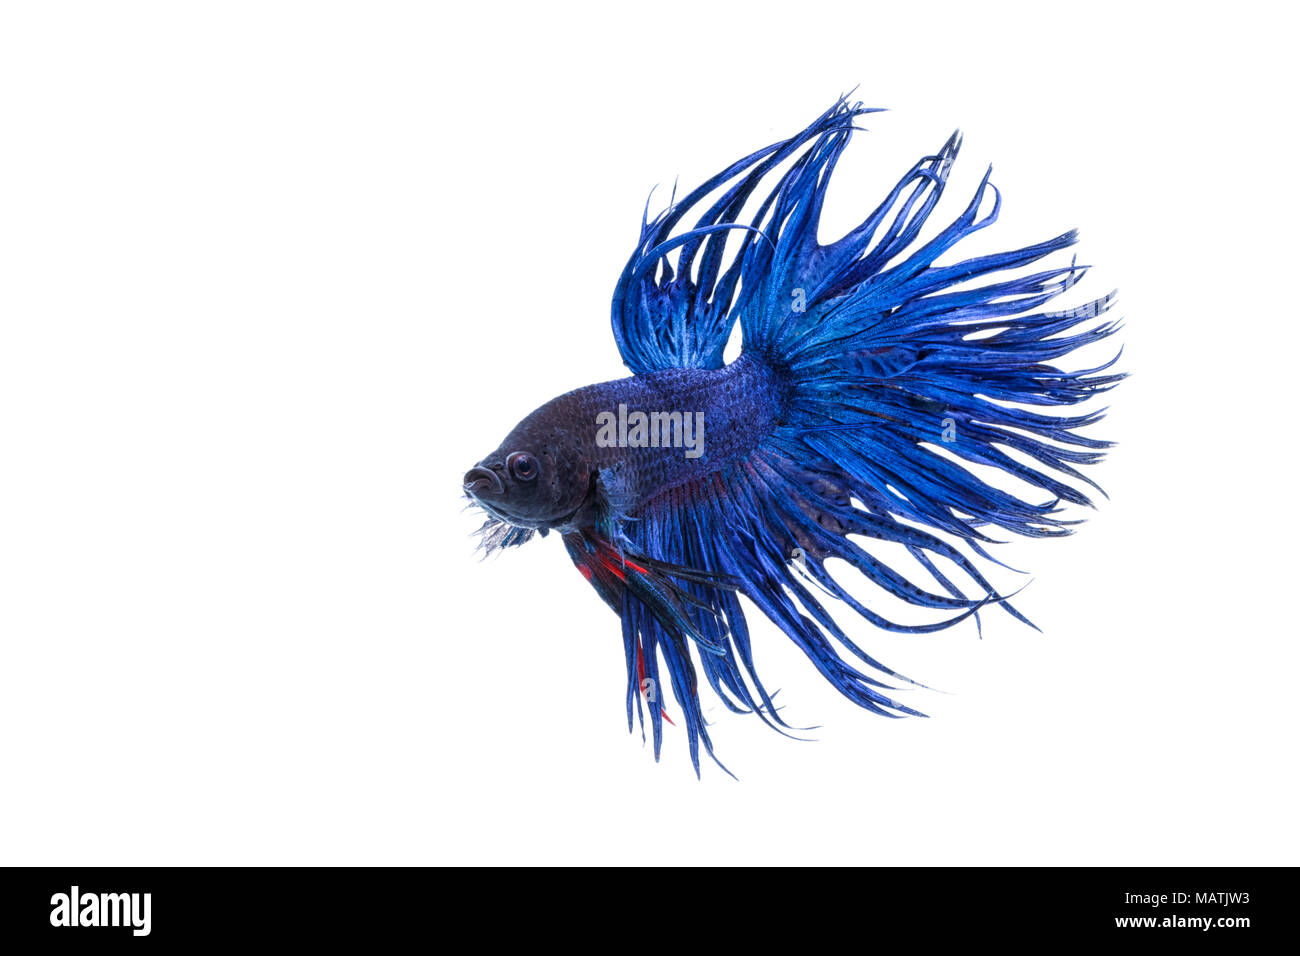 Crown tail fighting fish,siamese fighting fish isolated on black Stock Photo